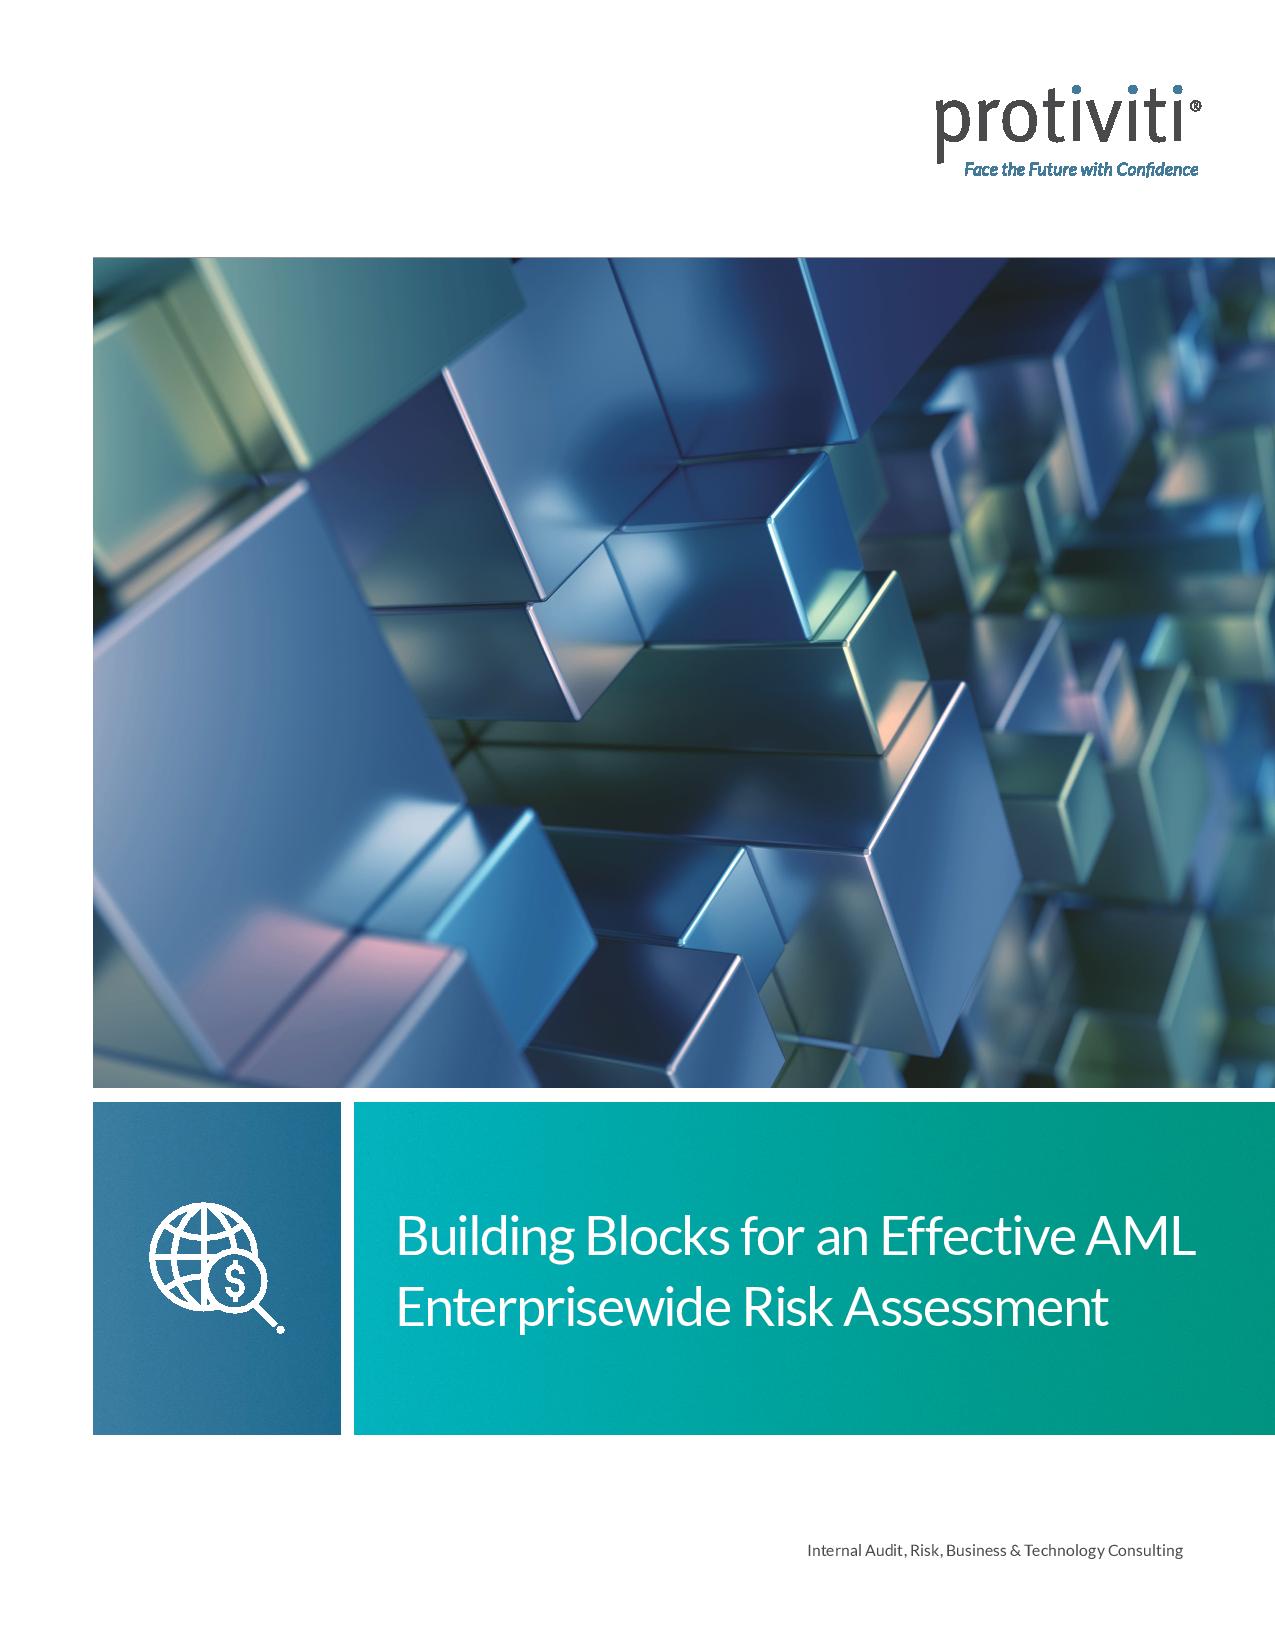 Screenshot of the first page of Building Blocks for an Effective AML Enterprisewide Risk Assessment